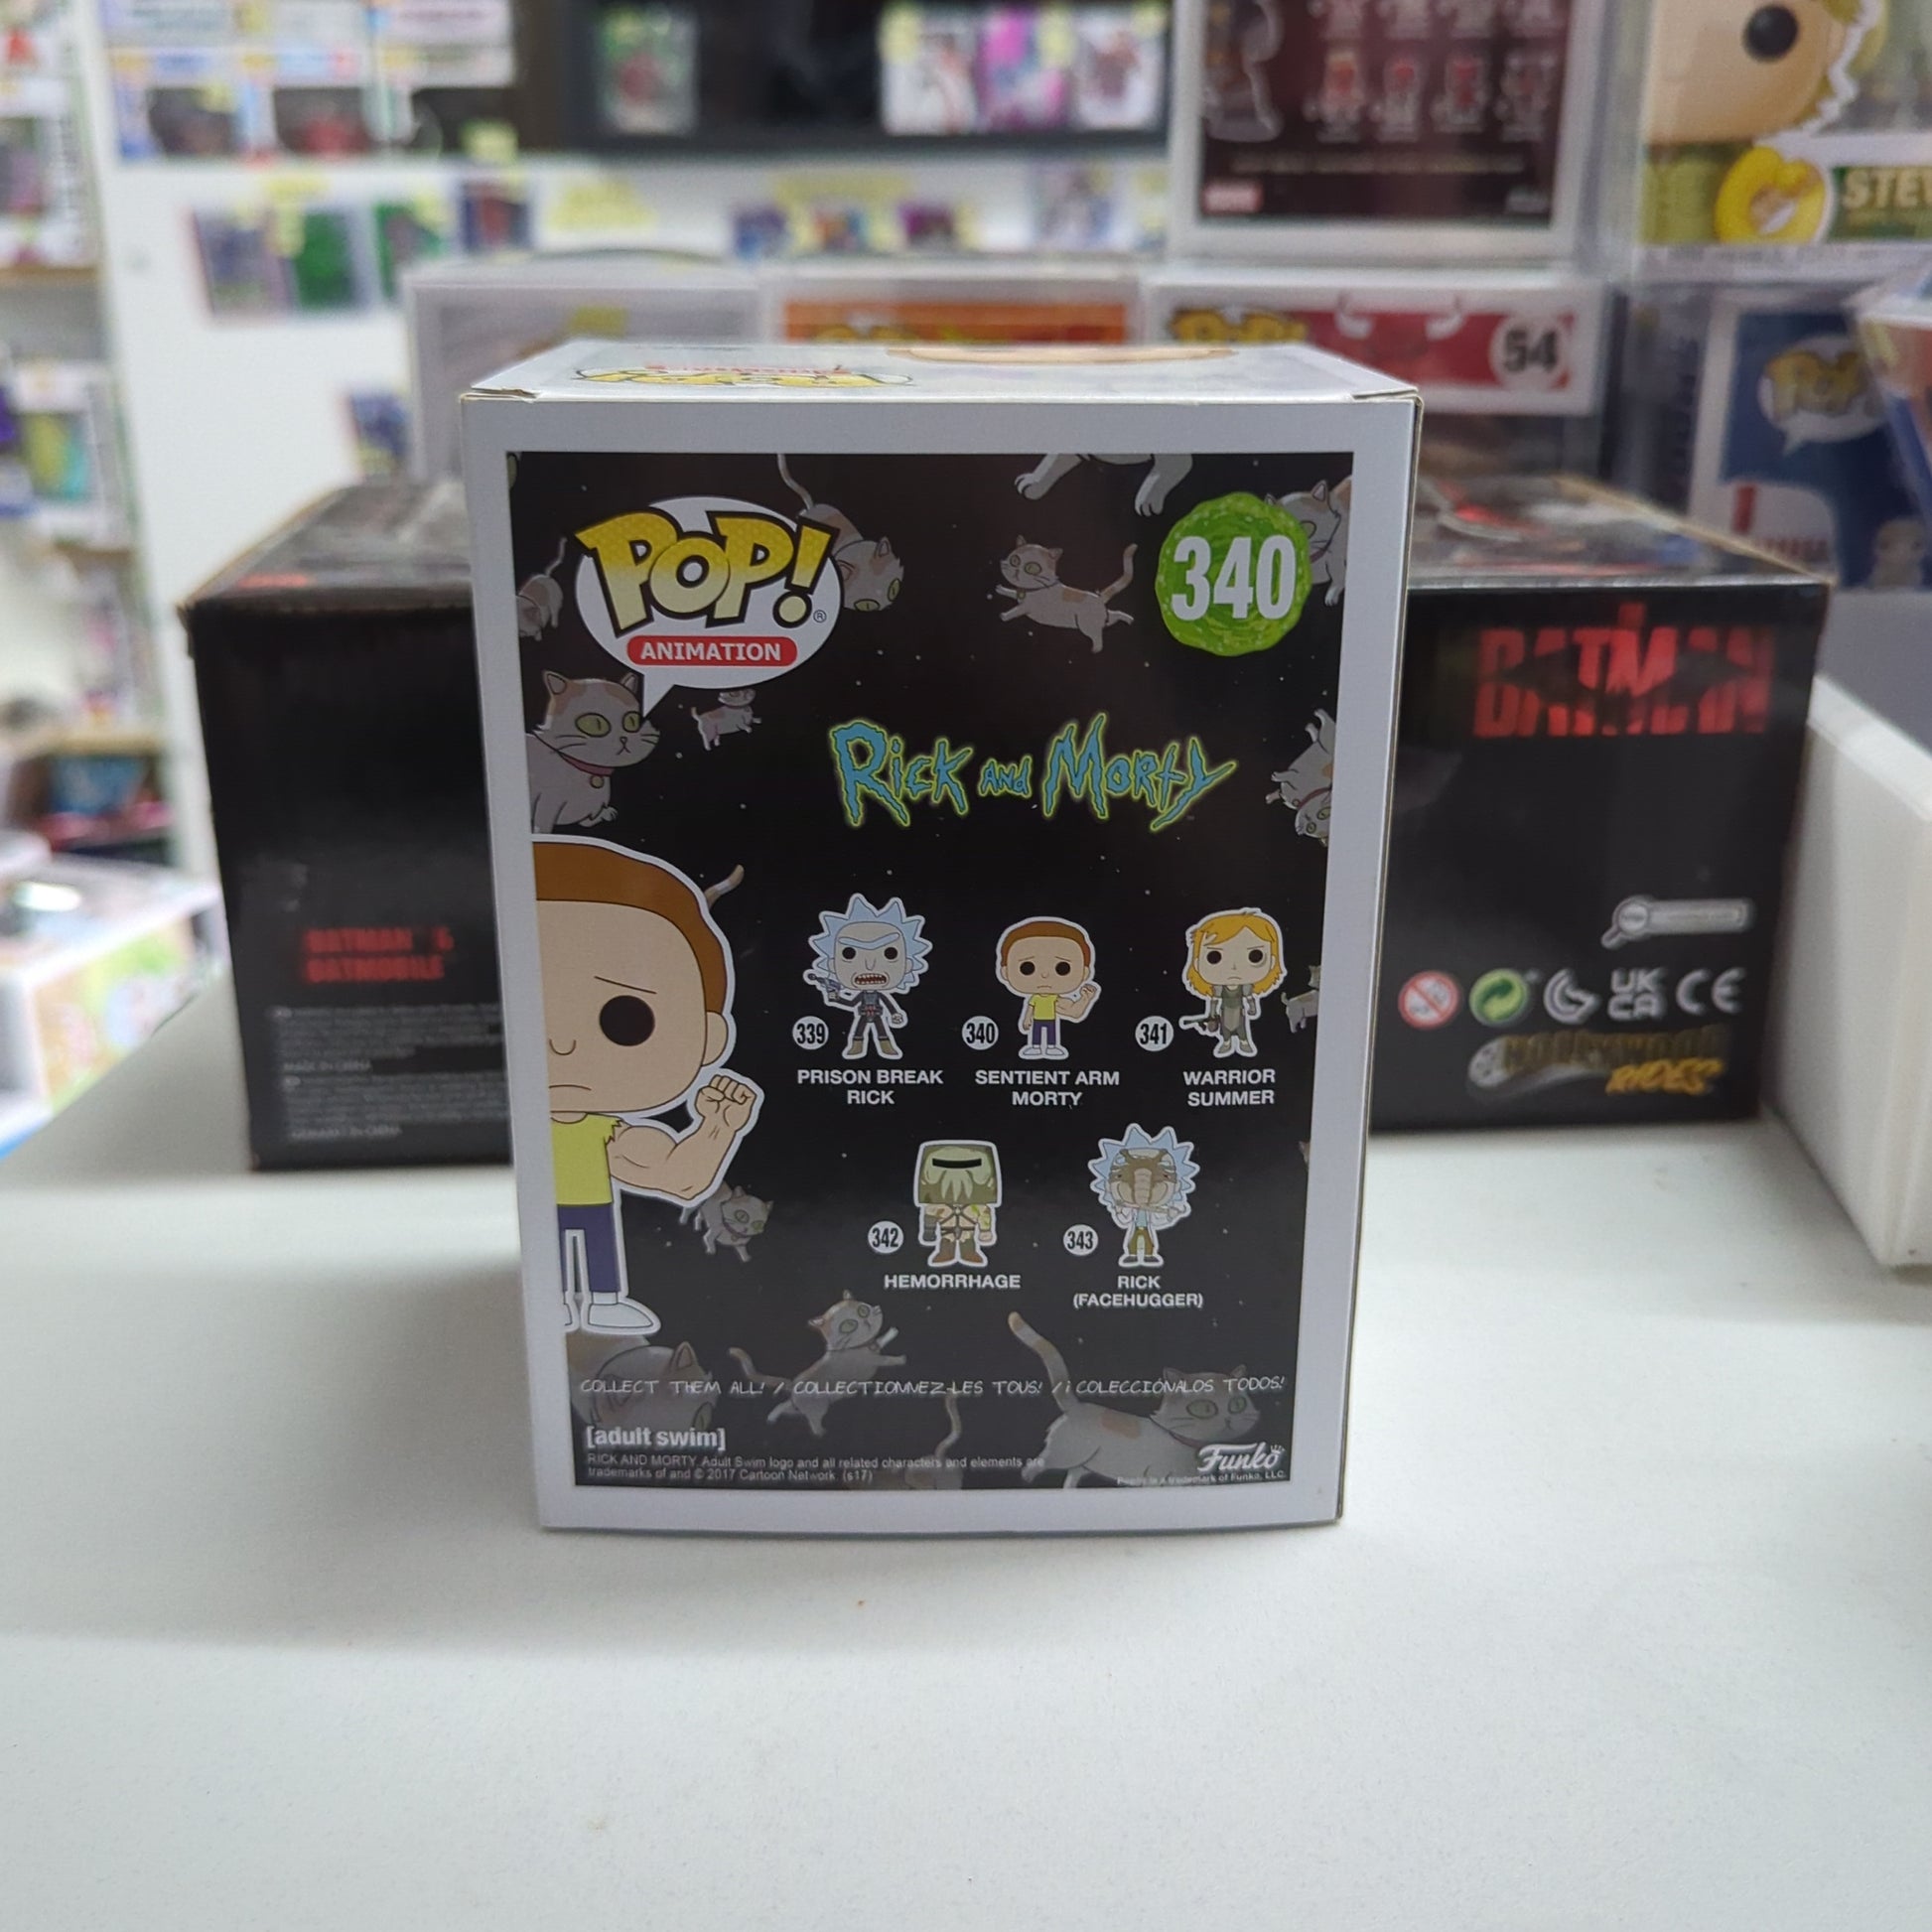 Sentient Arm Morty Chase 340 - Rick and Morty - Funko Pop Vinyl FRENLY BRICKS - Open 7 Days